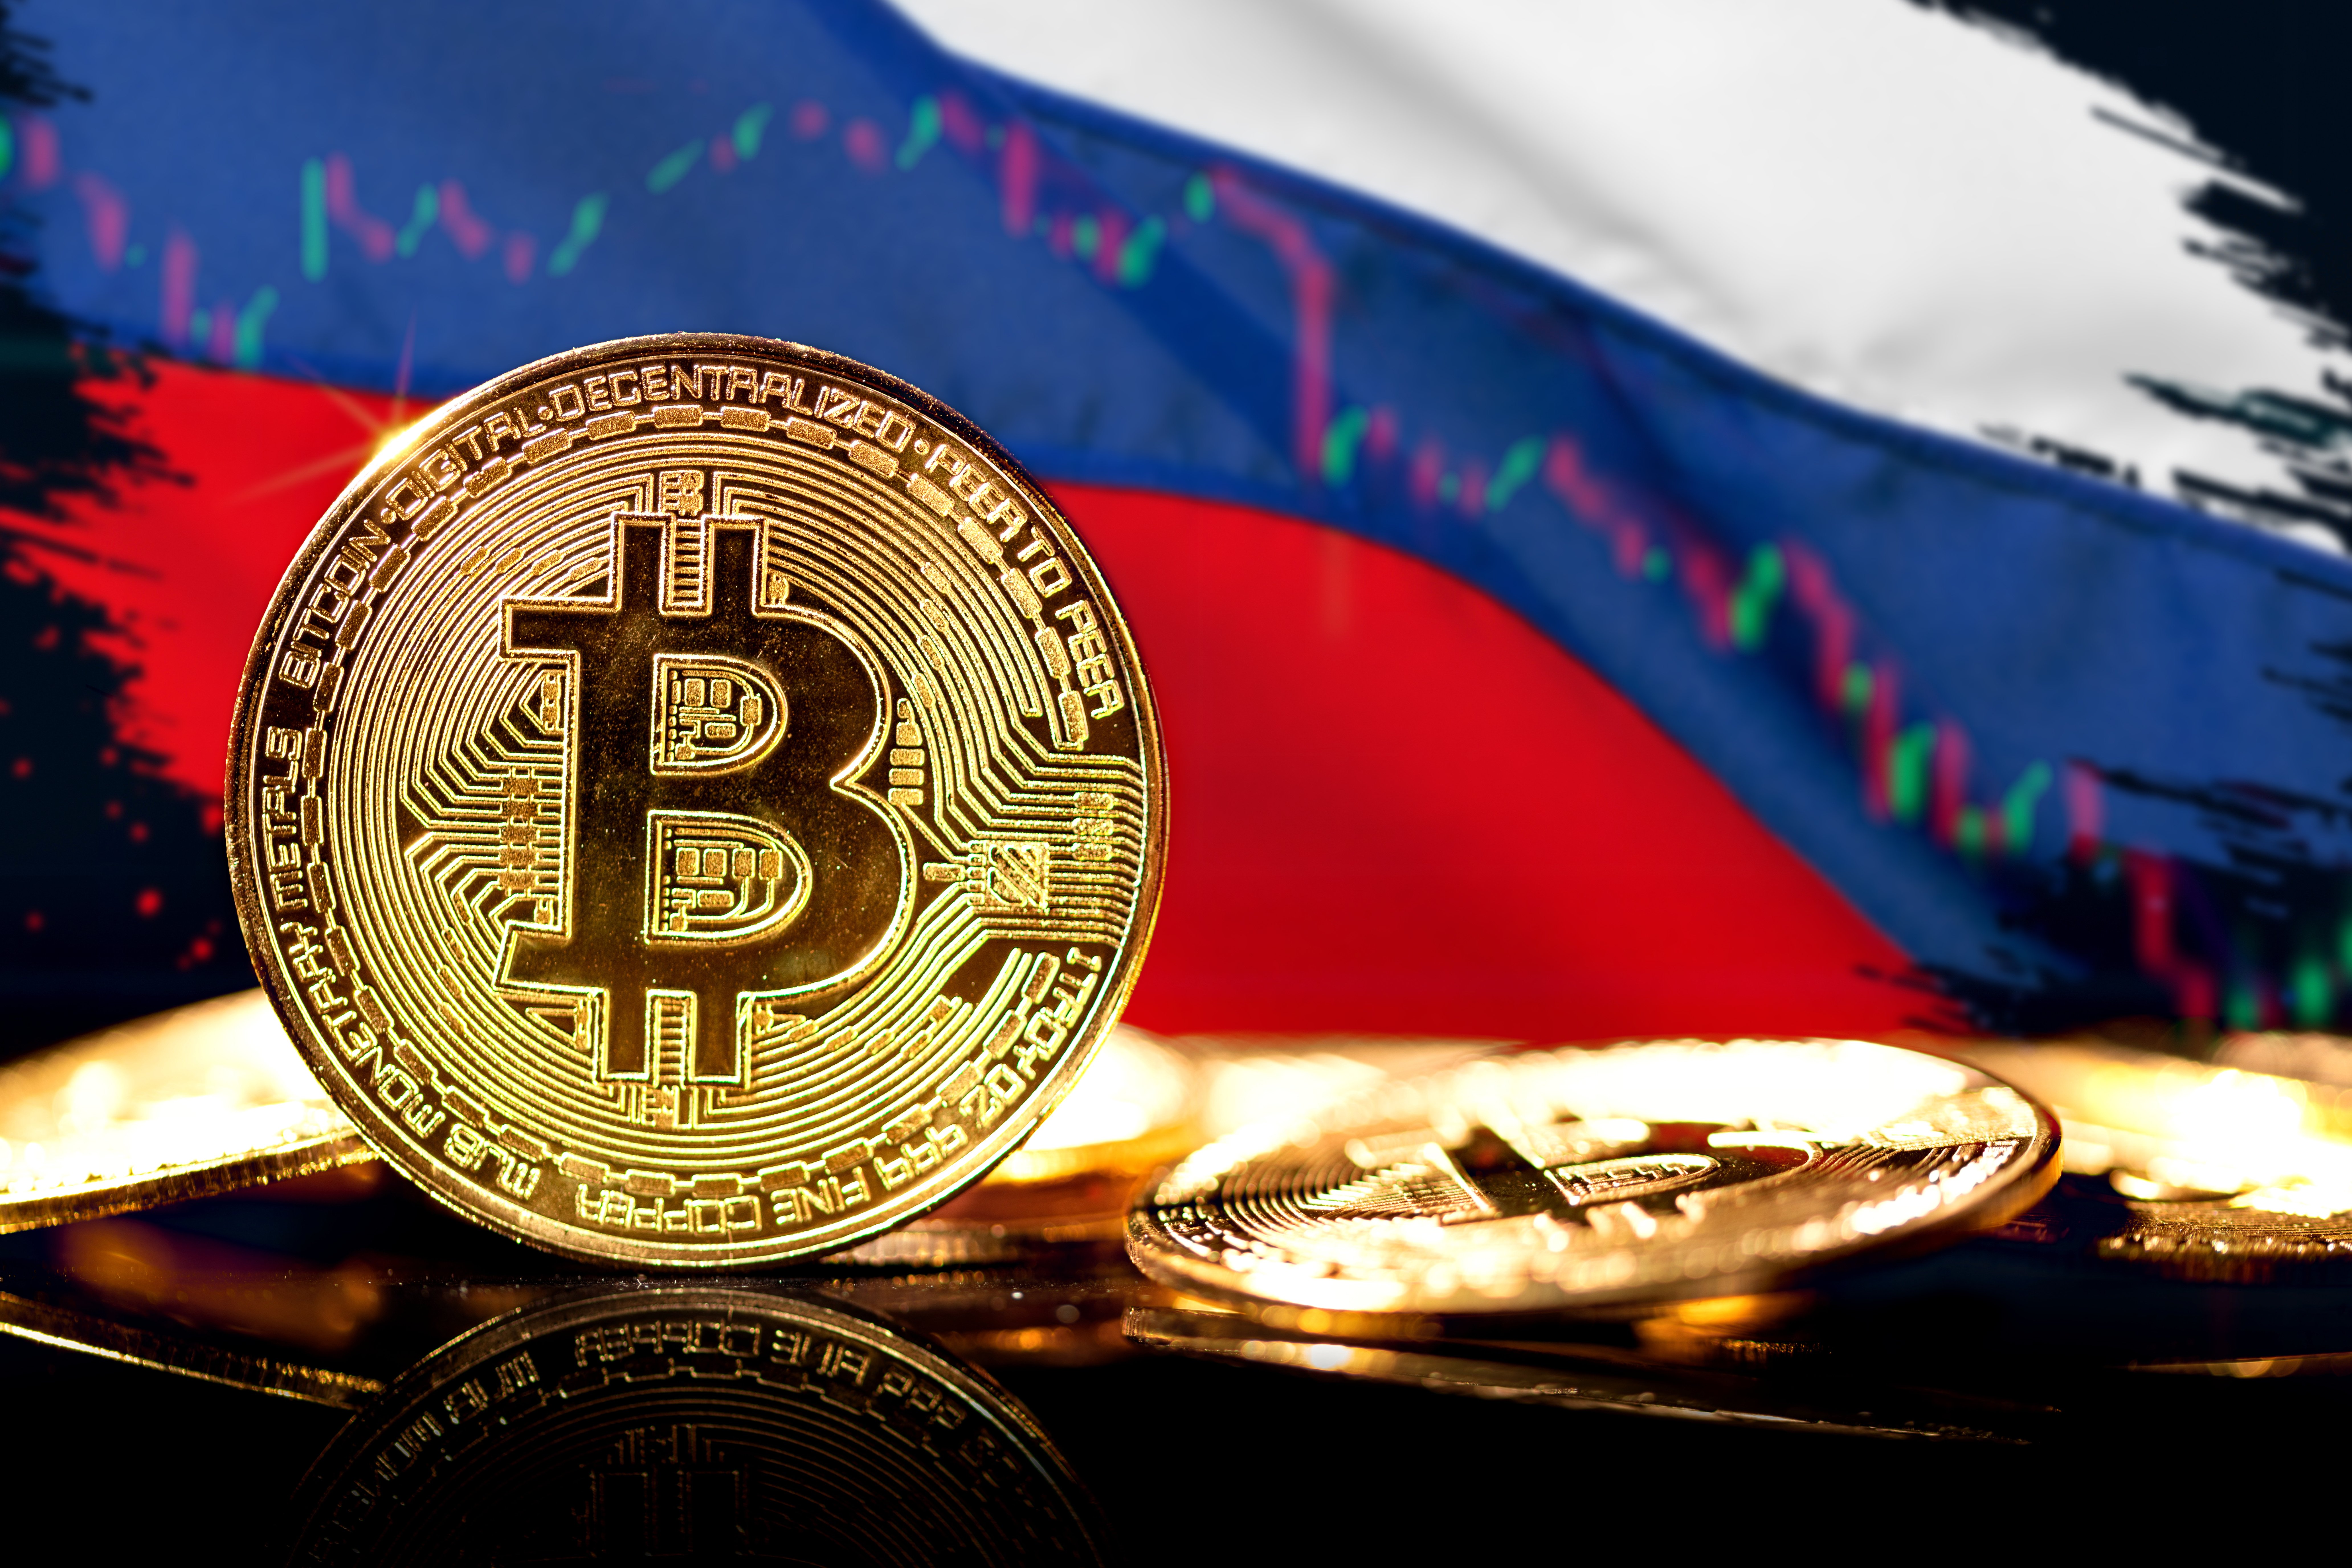 Artistic representations of a Bitcoin token, against a background of the Russian flag and a line chart.